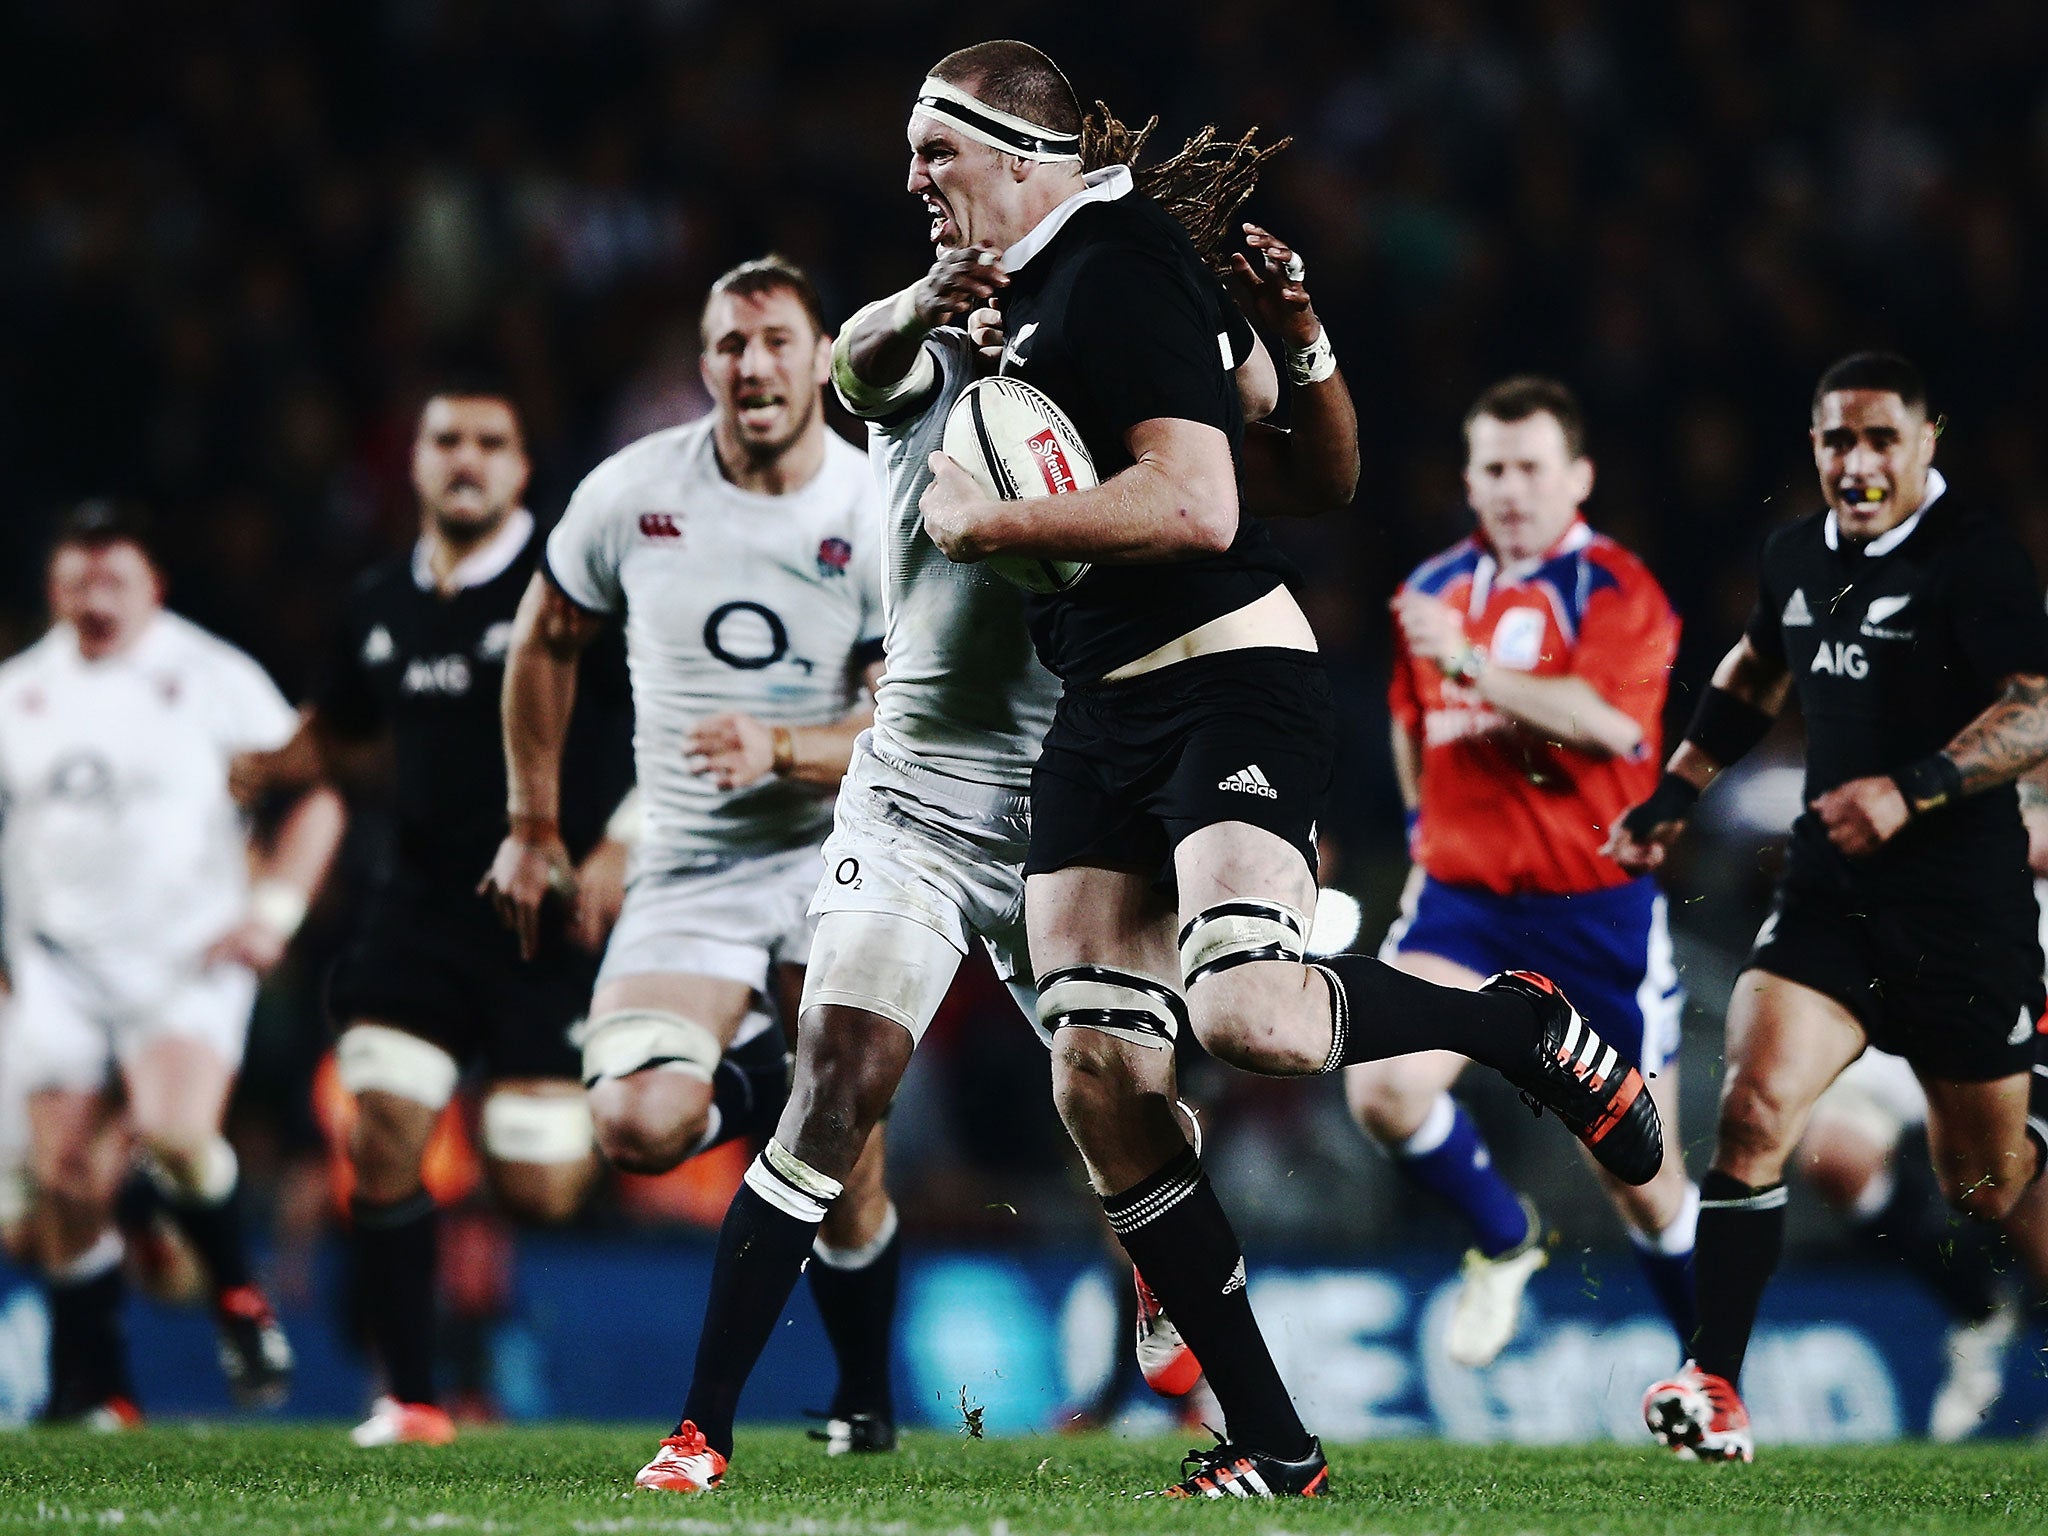 Brodie Rettallick attempts to break the tackle of Marland Yarde